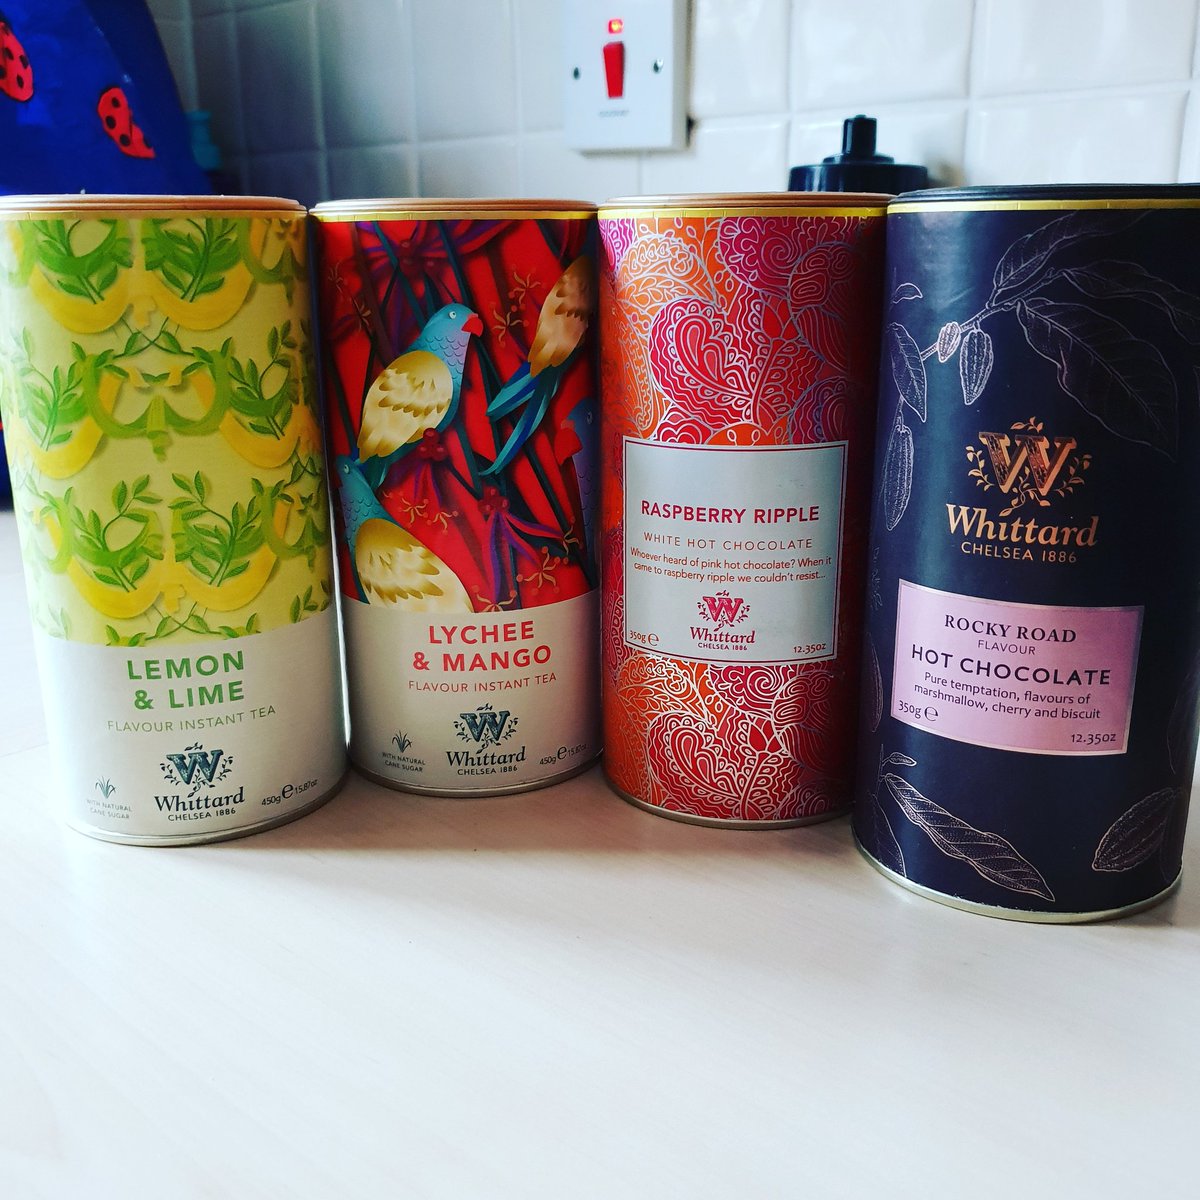 So excited to try out my new tea and hot chocolate flavours! Nom! XD #tea #hotchocolate #fruit #cosy #whittardtea #whittardofchelsea @whittarduk